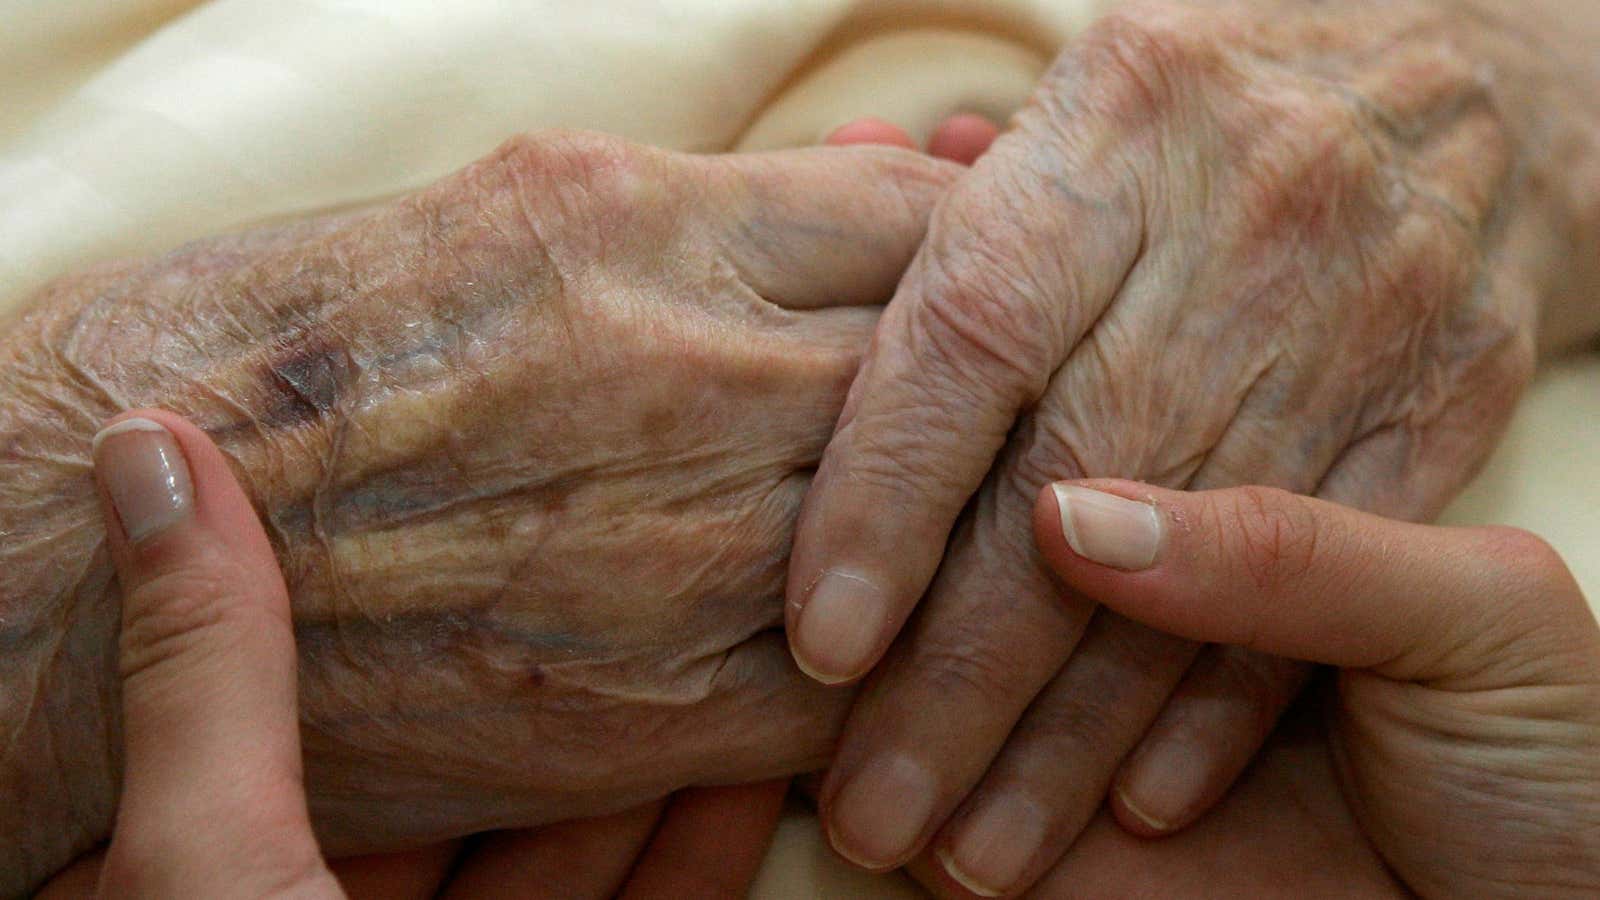 Caring for the elderly will be the most meaningful future-proof job.